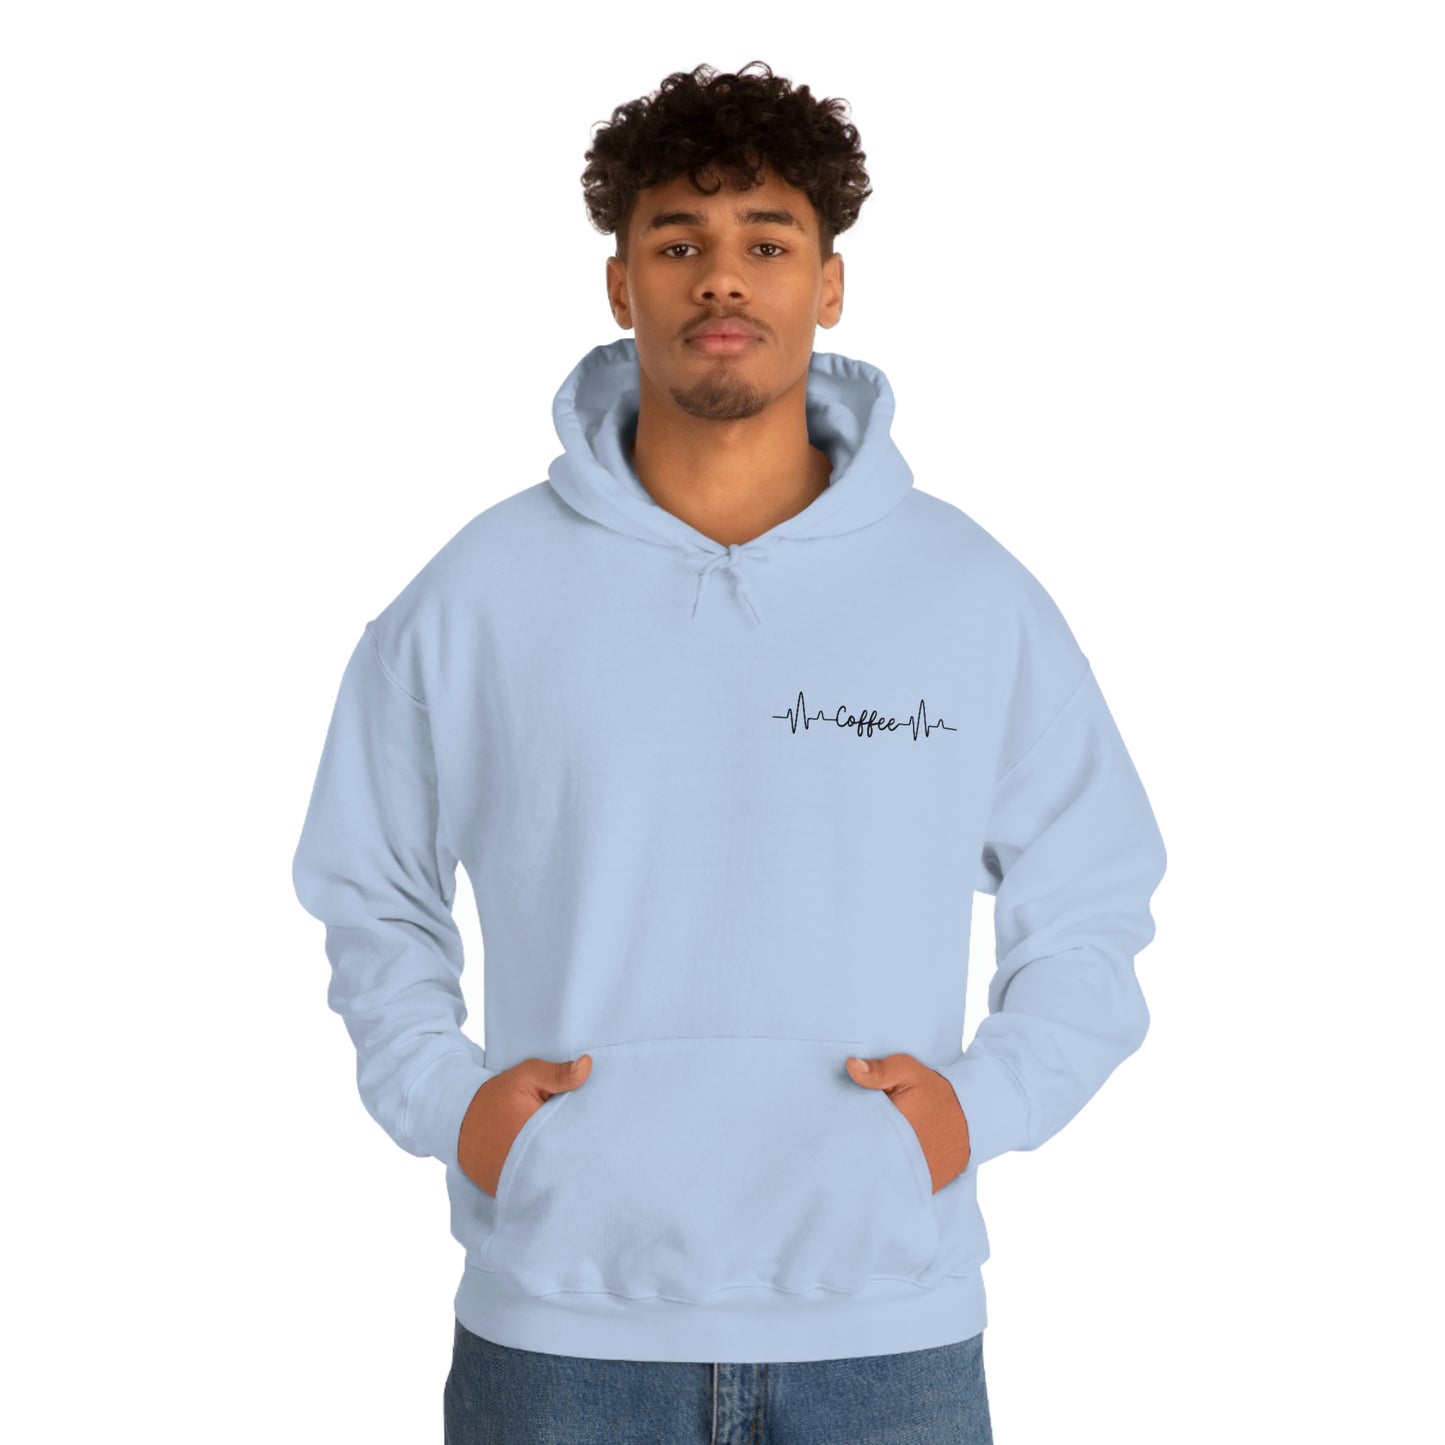 Hoodie Treat Yourself to Cozy Comfort and Caffeine with Our Lifeline Coffee Hooded Sweatshirt - Perfect for Any Coffee Lover!